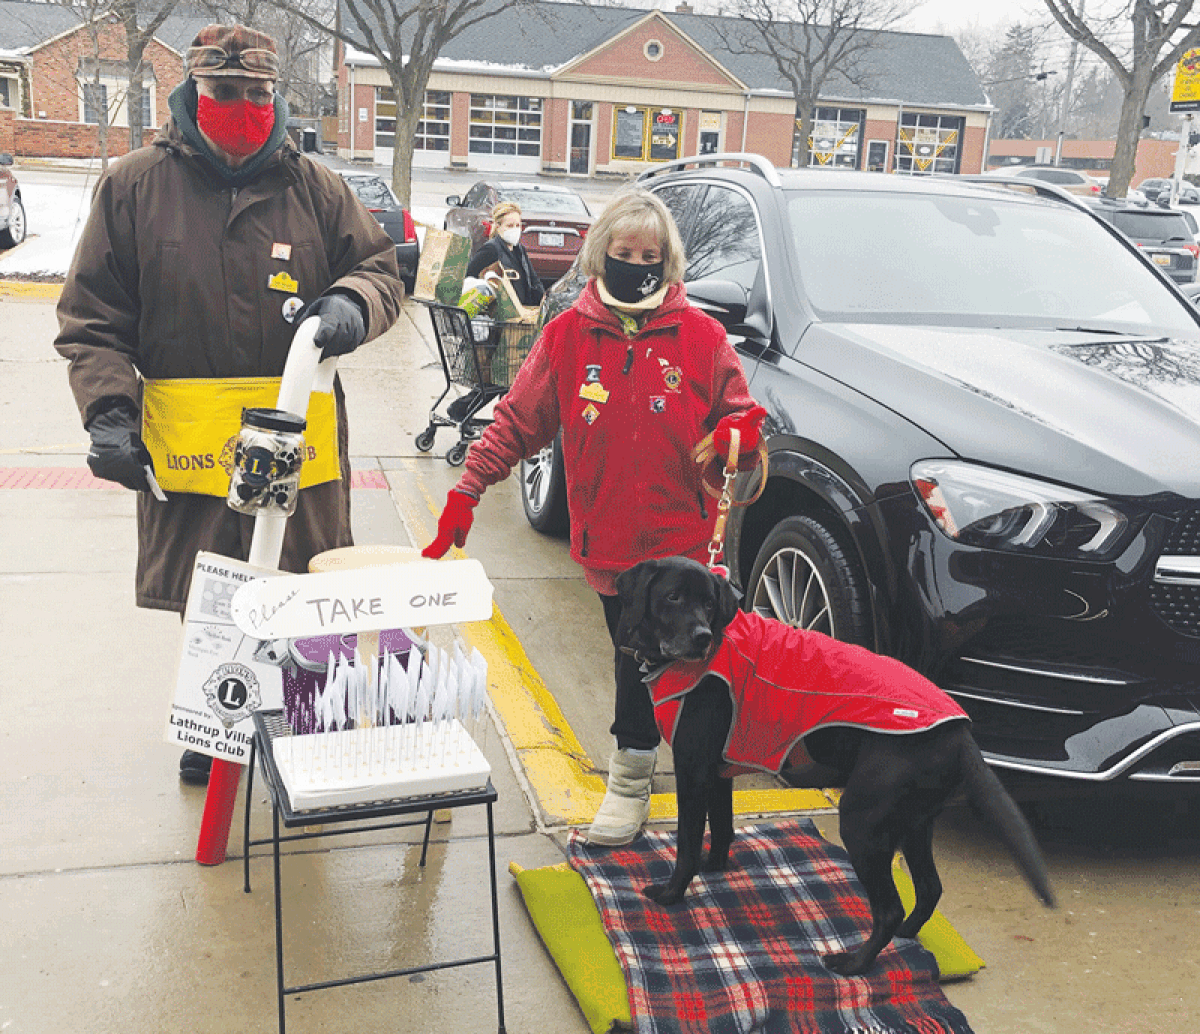  Lions Club members Dick and Nancy Maxwell collect with Leader Dog Chase.  